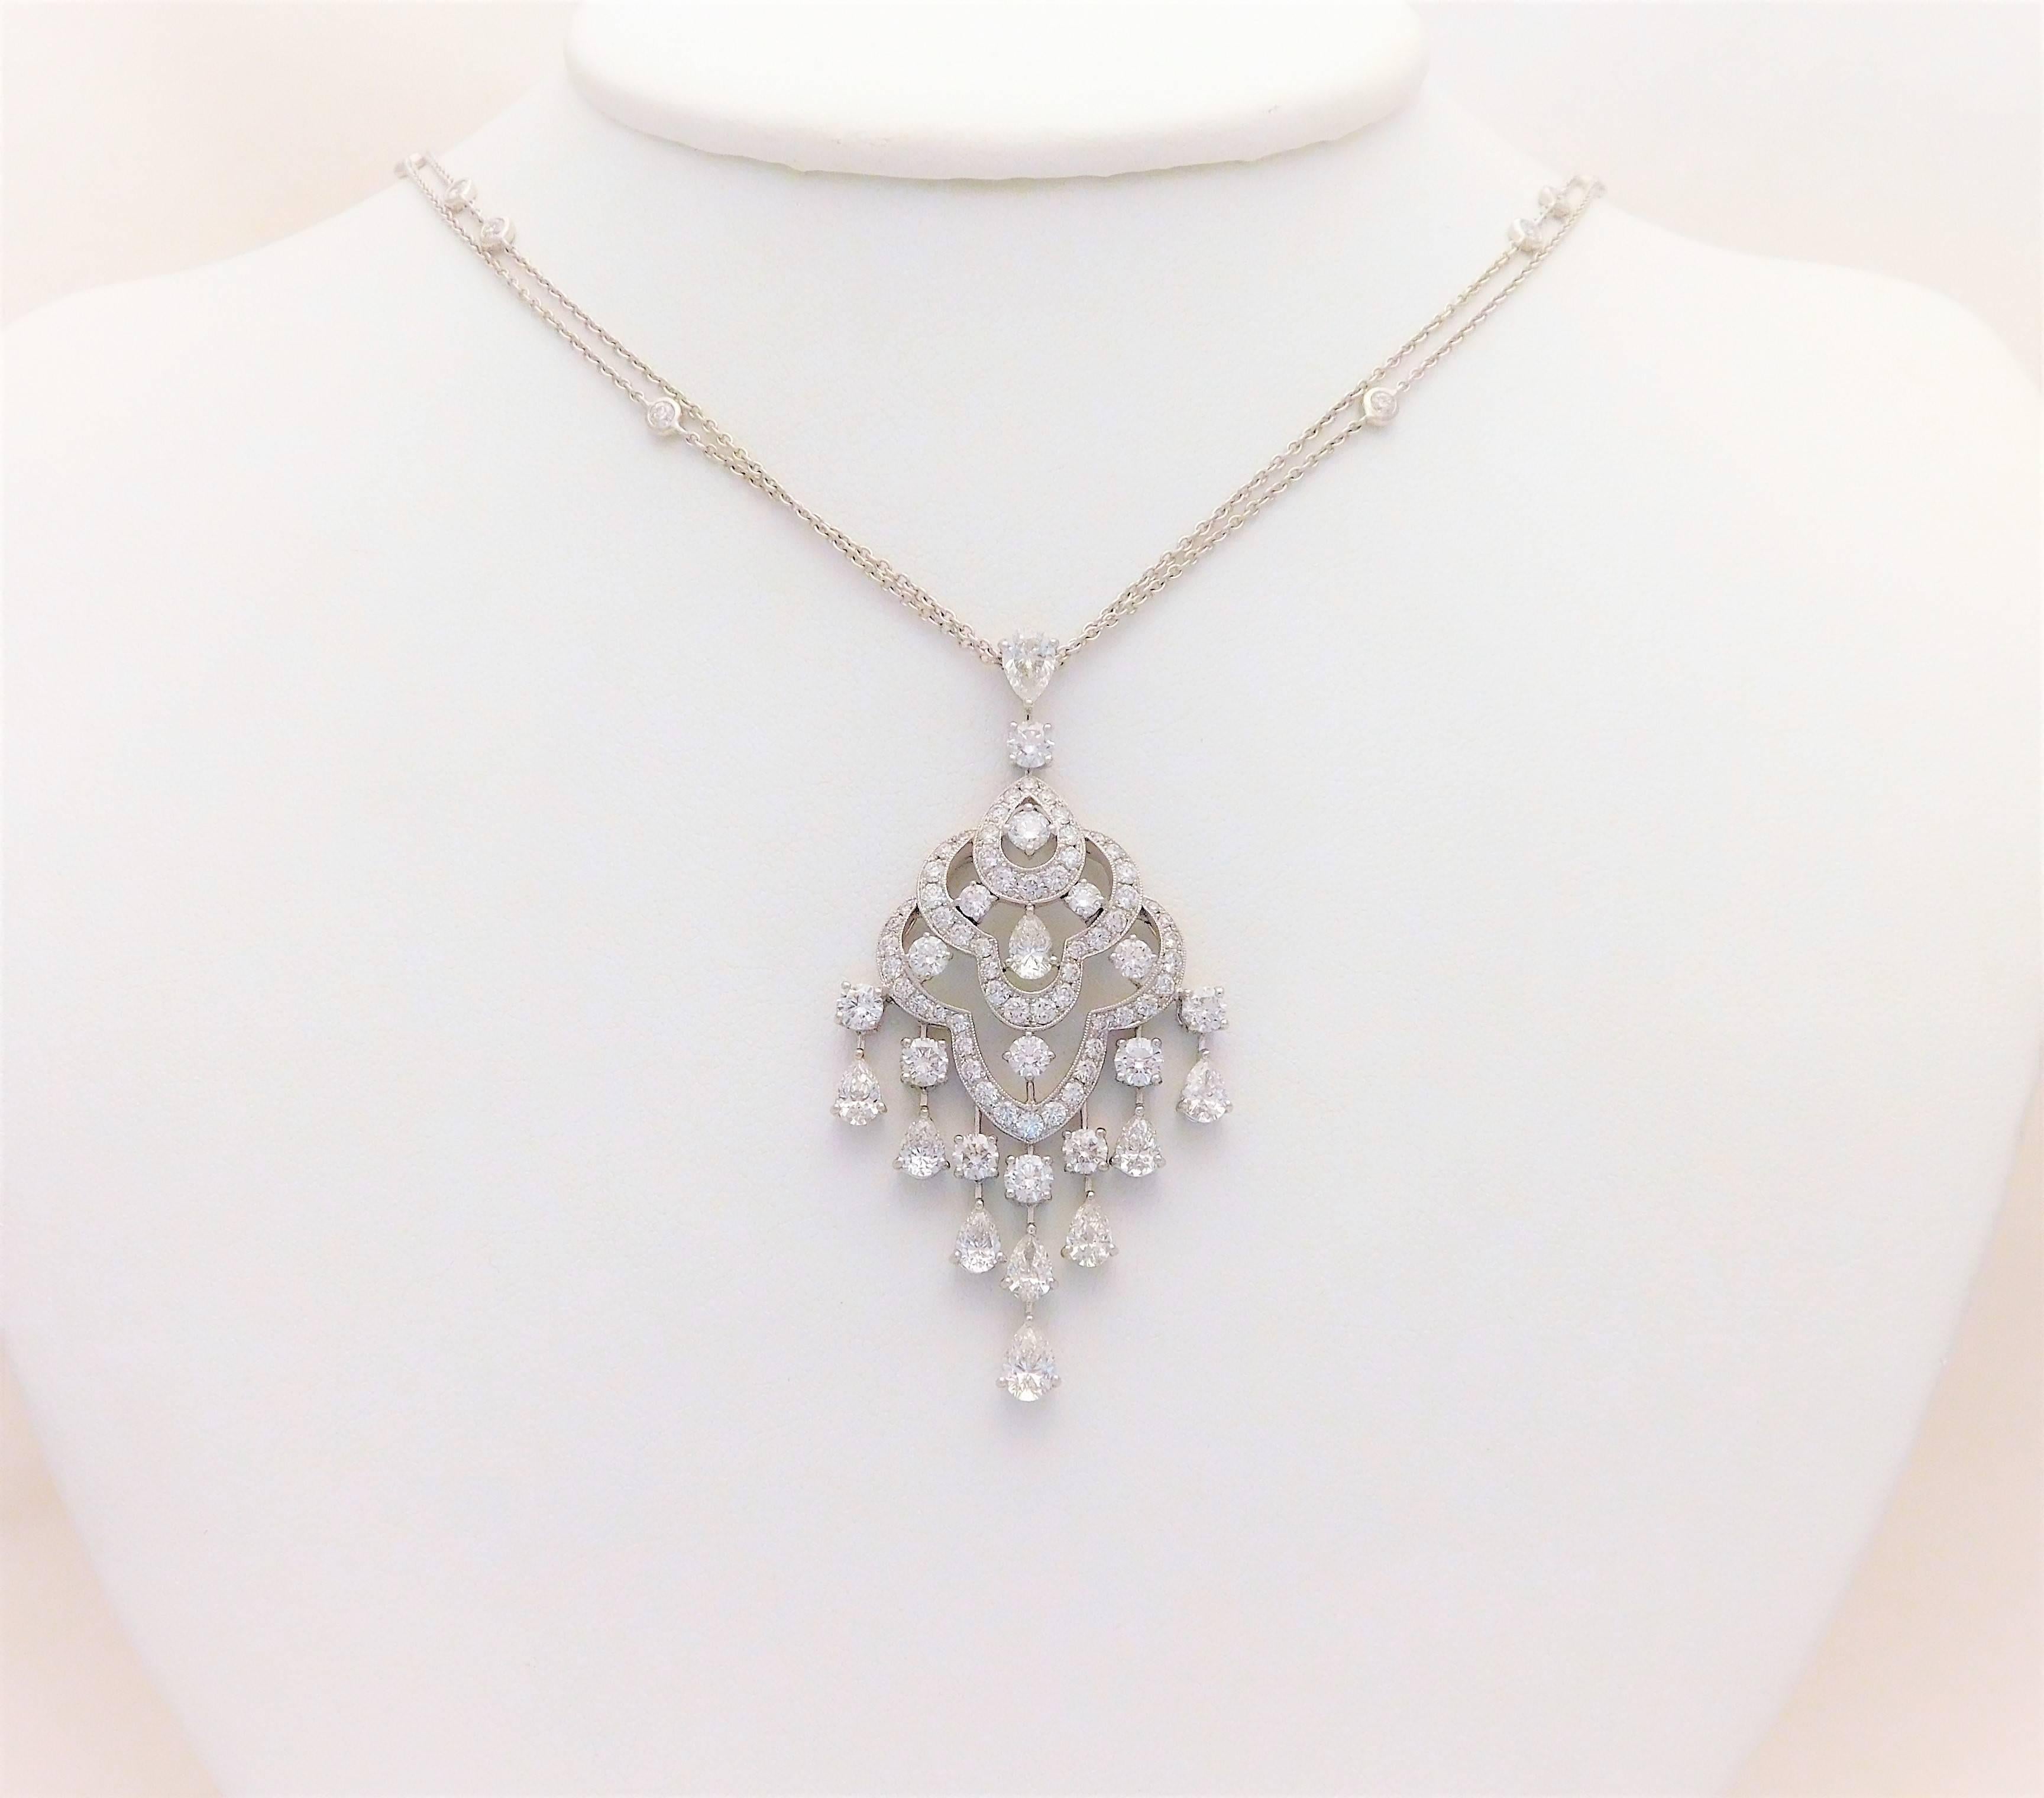 From an elegant Southern estate.  Circa 2017.  This absolutely dazzling diamond necklace has been meticulously crafted in solid 18k white gold.  Pictures do not do this piece justice.  It is masterfully jeweled with a total of (10) pear